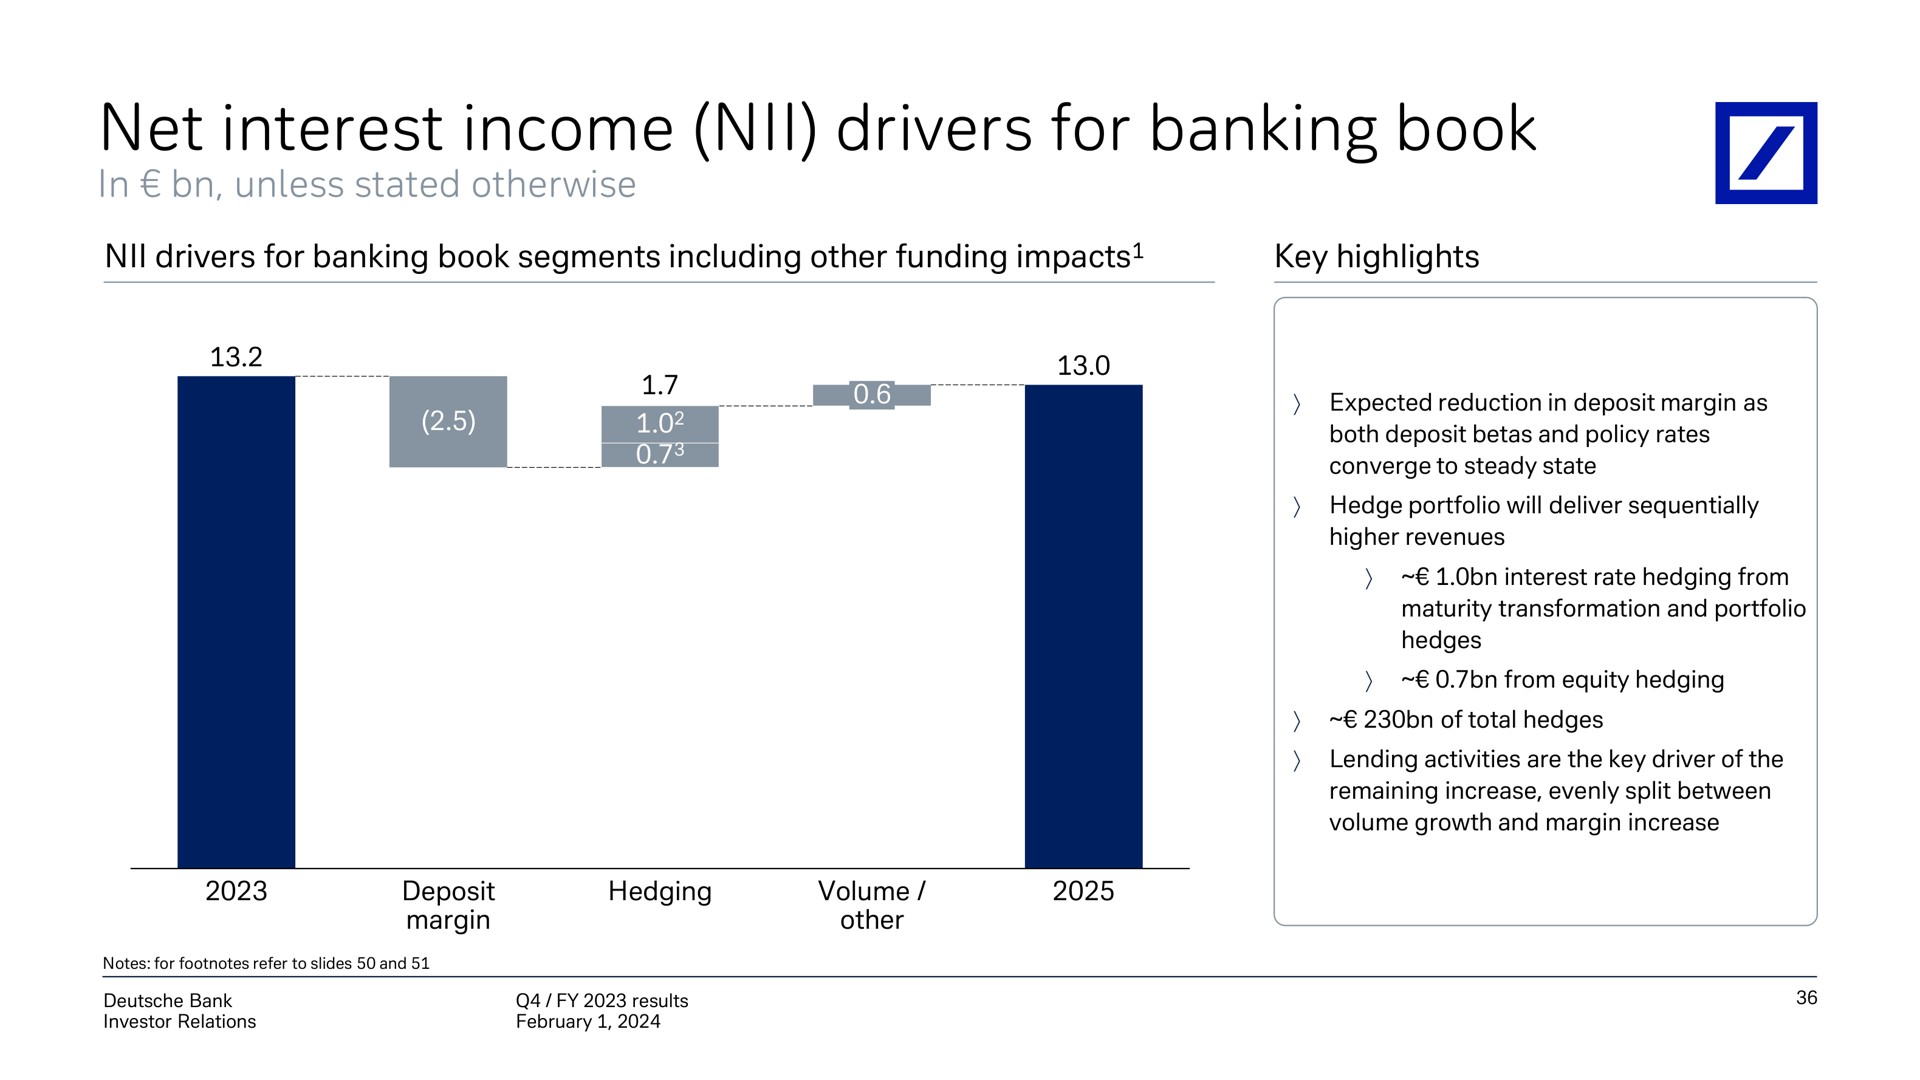 net interest income drivers for banking book | Deutsche Bank